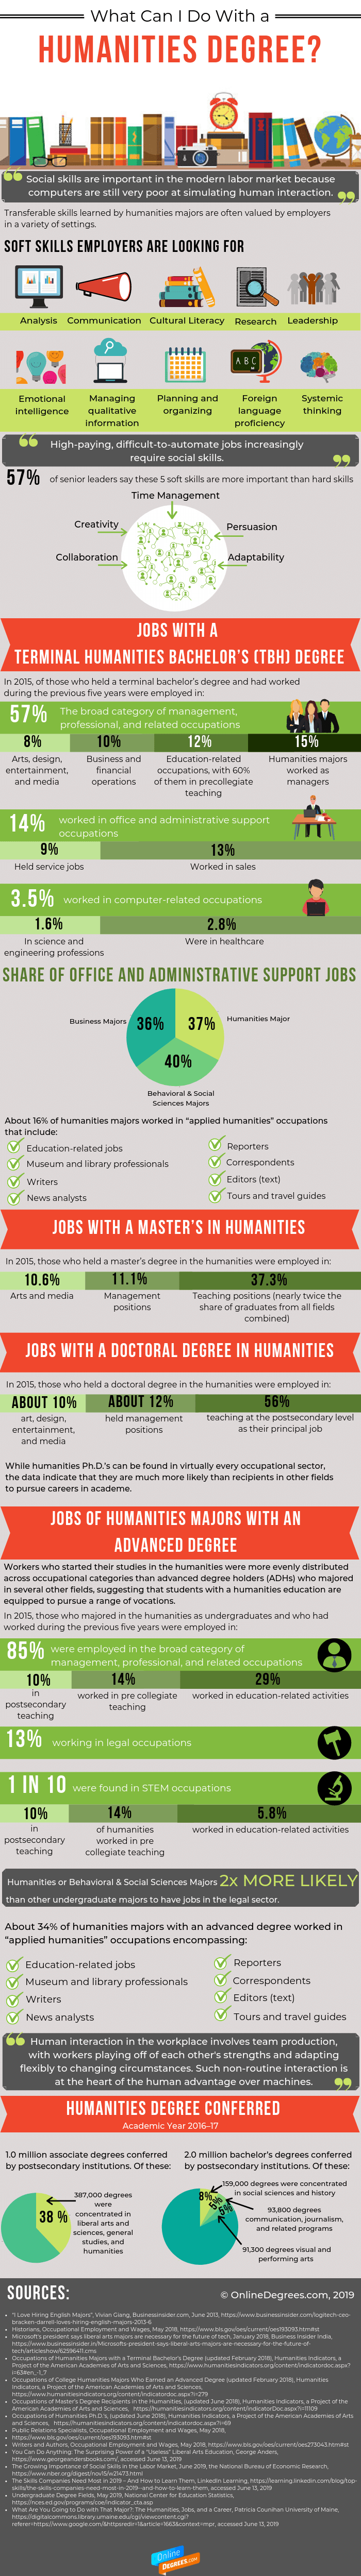 What can you do with a degree in humanities?